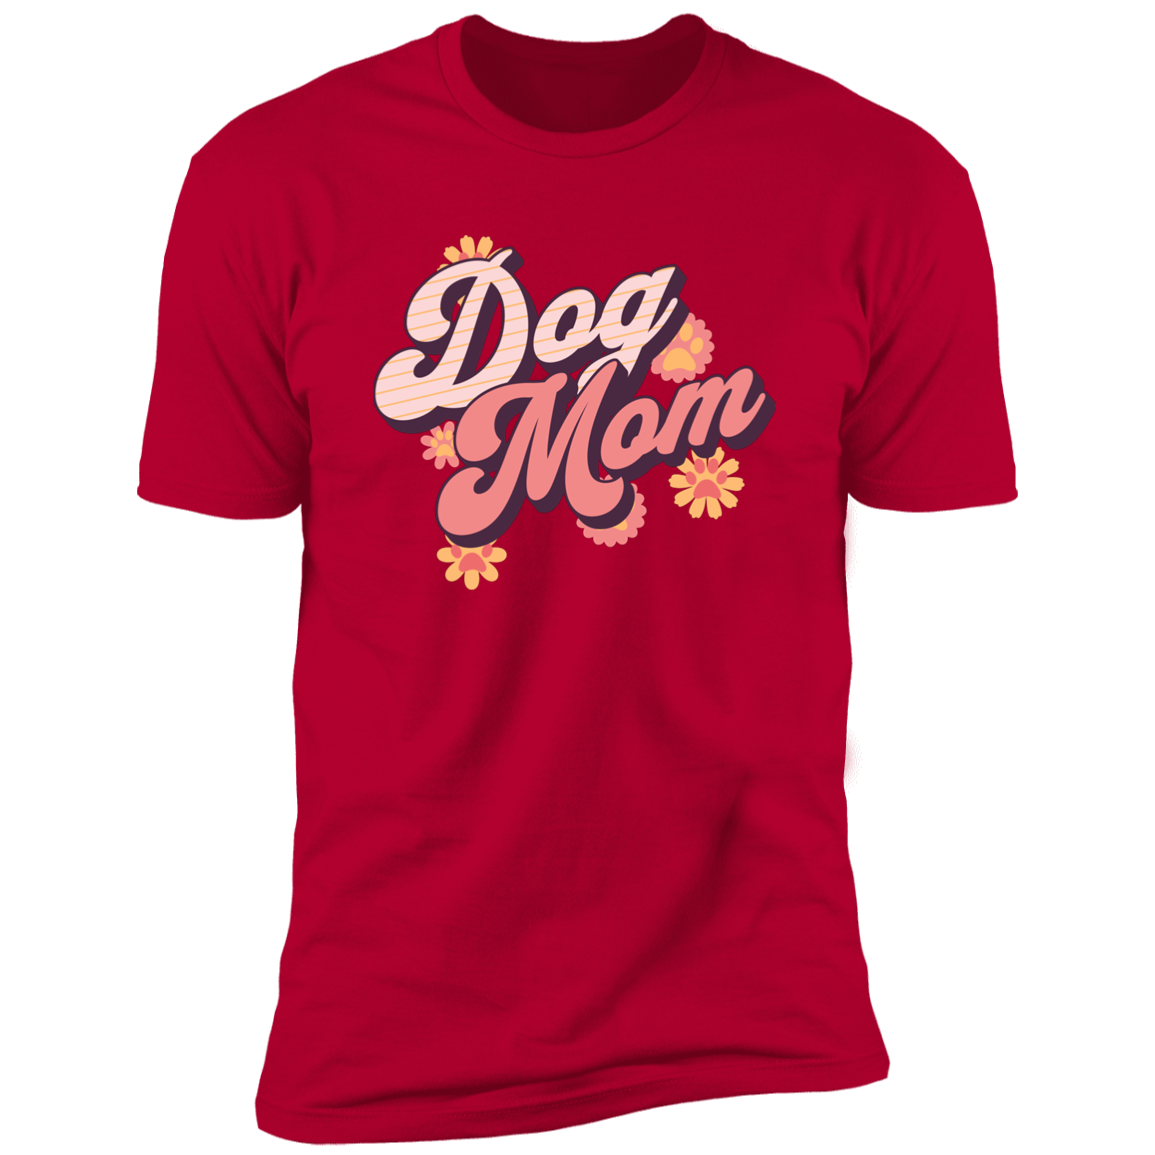 Retro Dog Mom t-shirt, Dog Mom shirt, Dog T-shirt for humans, in red